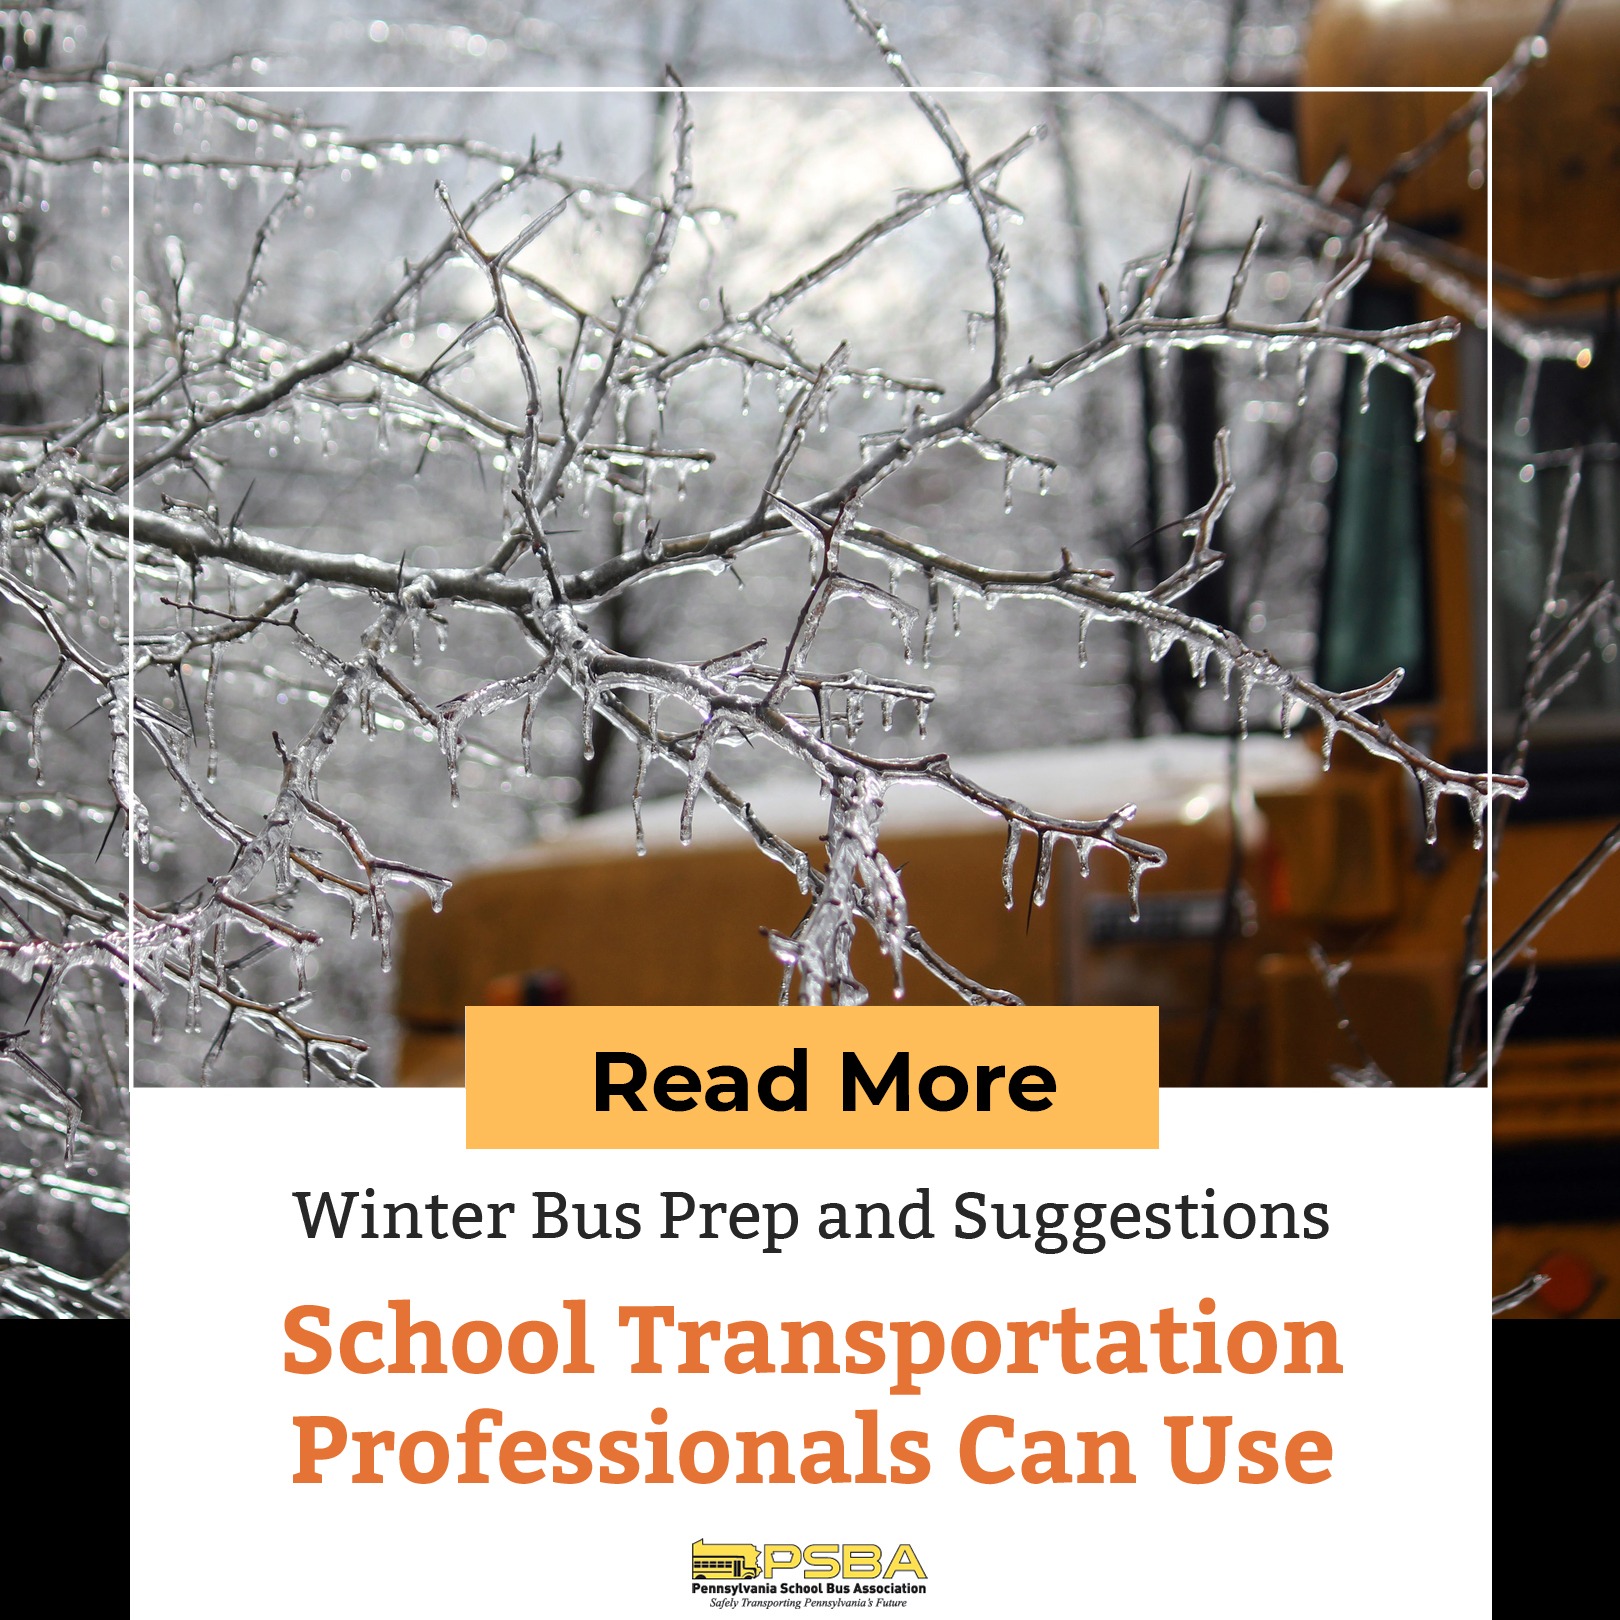 Winter Bus Prep and Suggestions School Transportation Professionals Can Use